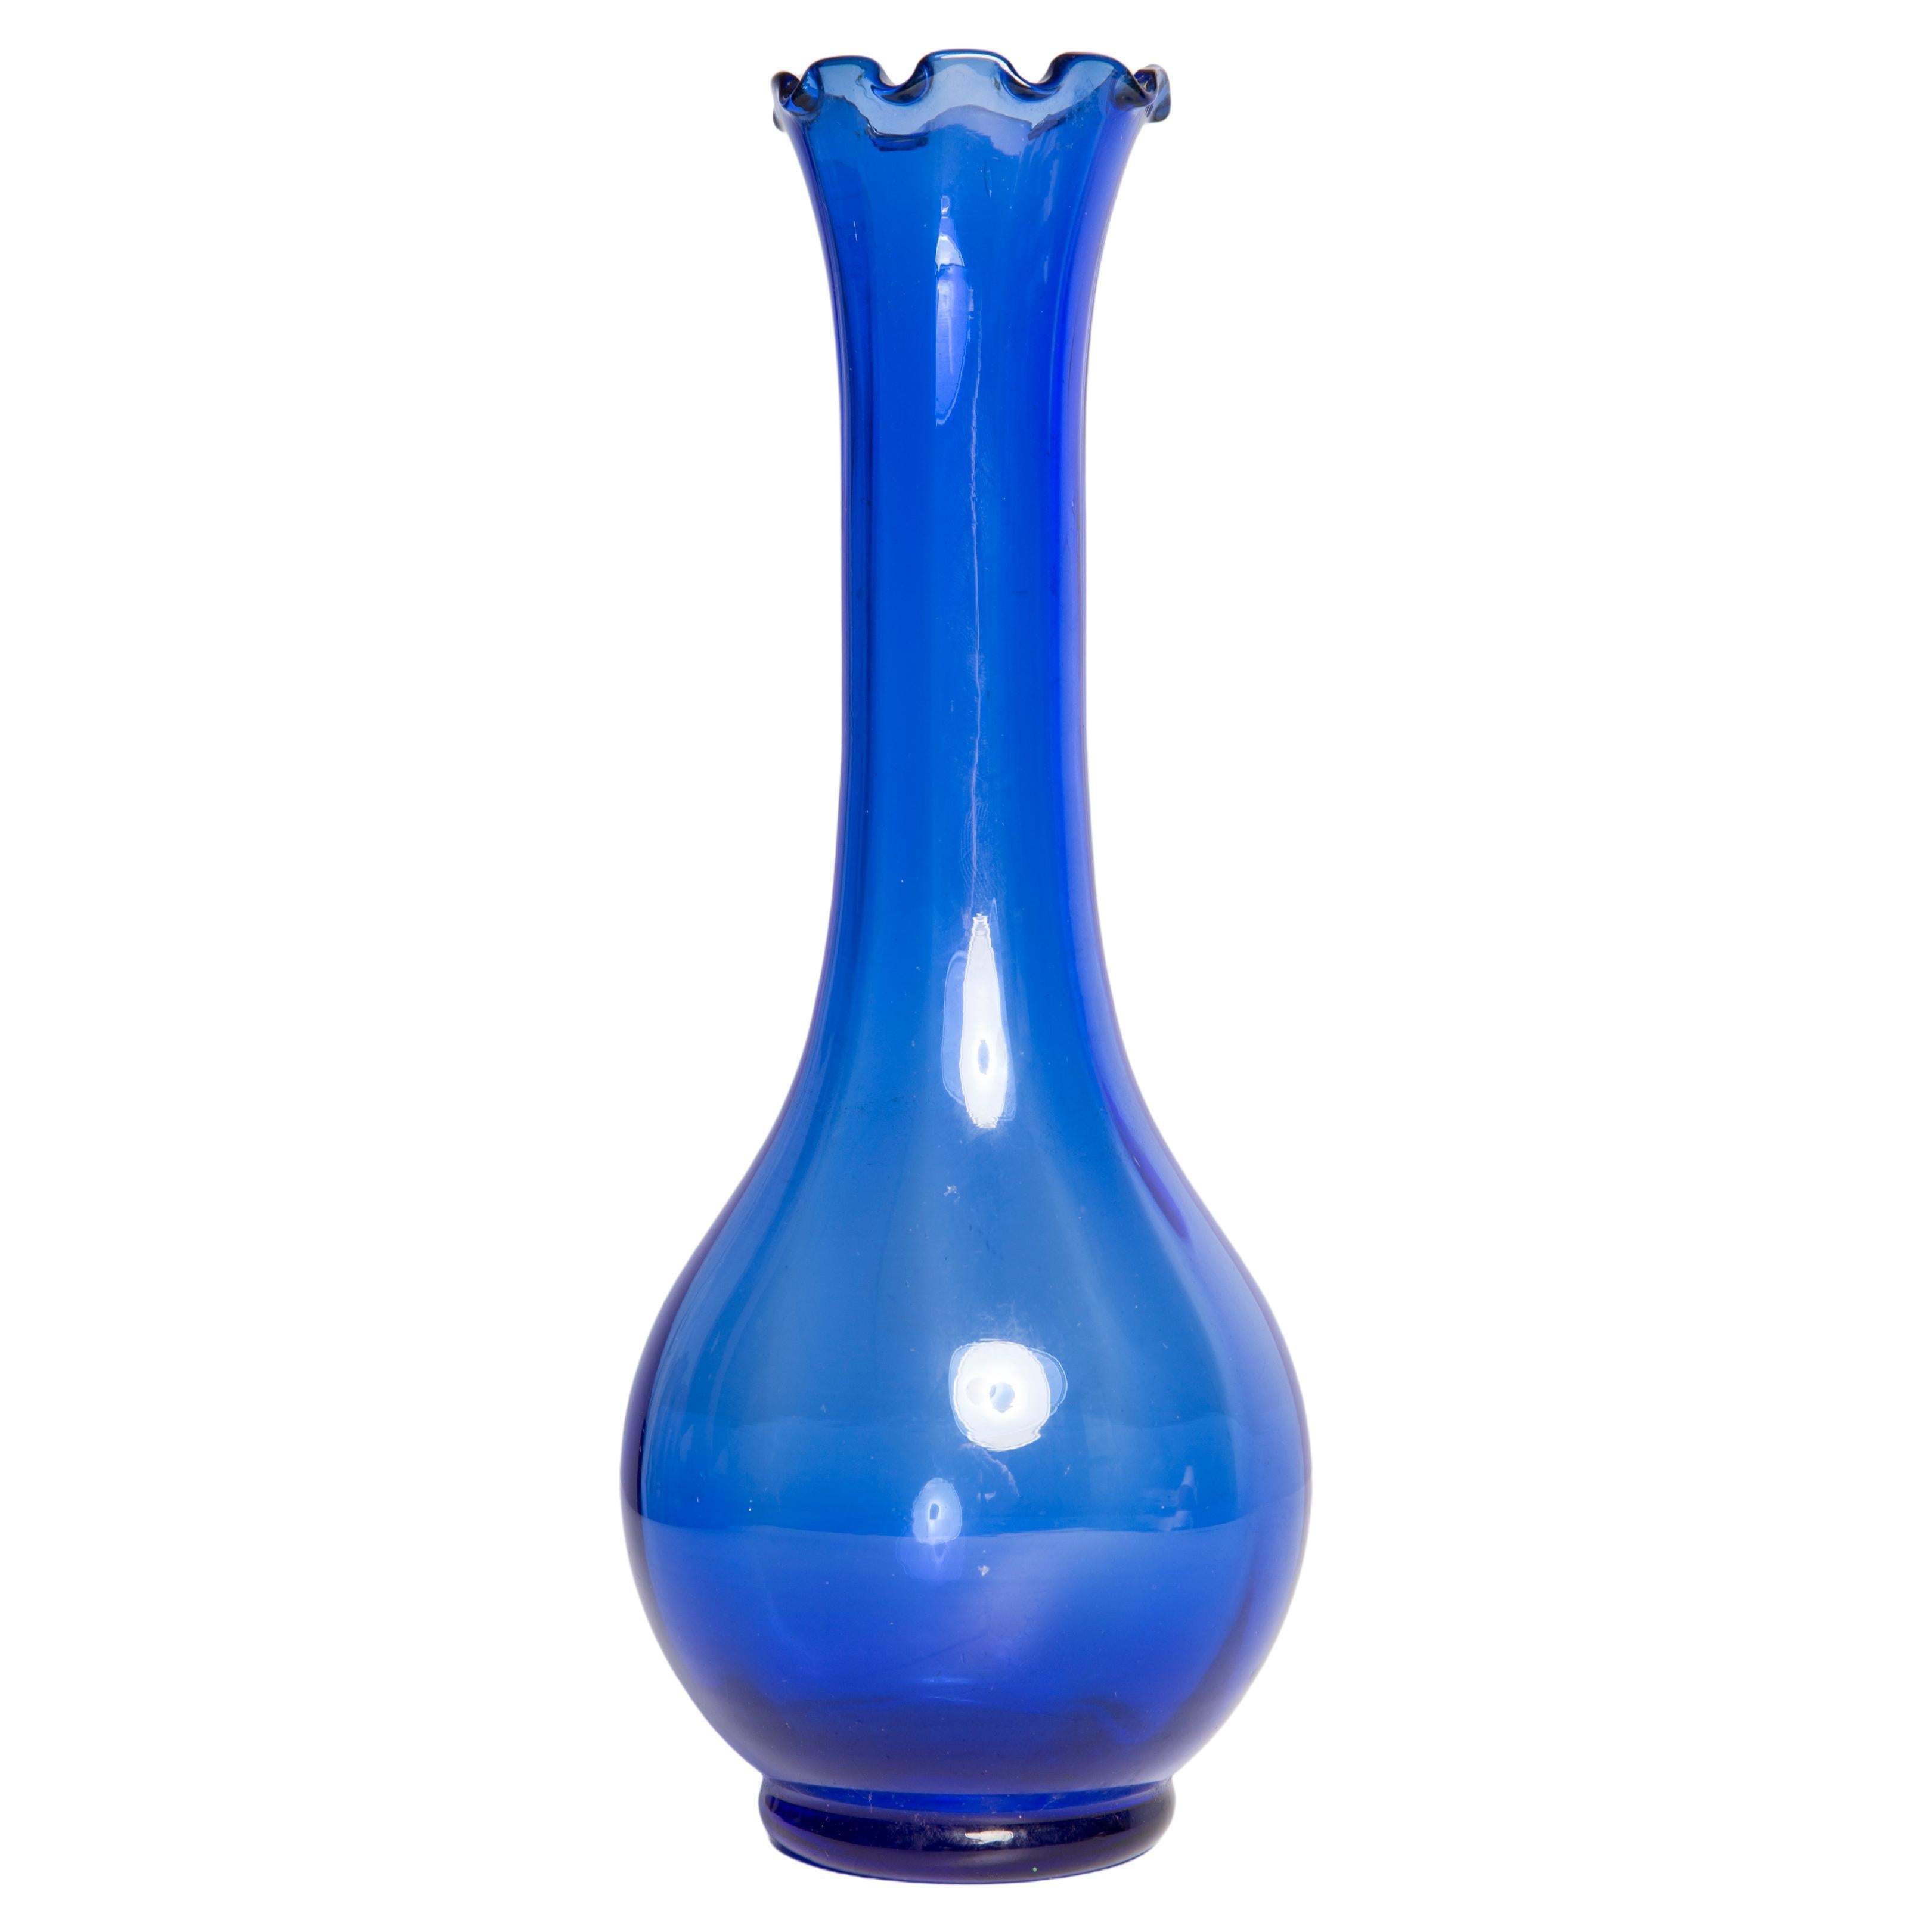 Midcentury Glass Blue Vase with a Frill, Europe, 1960s For Sale